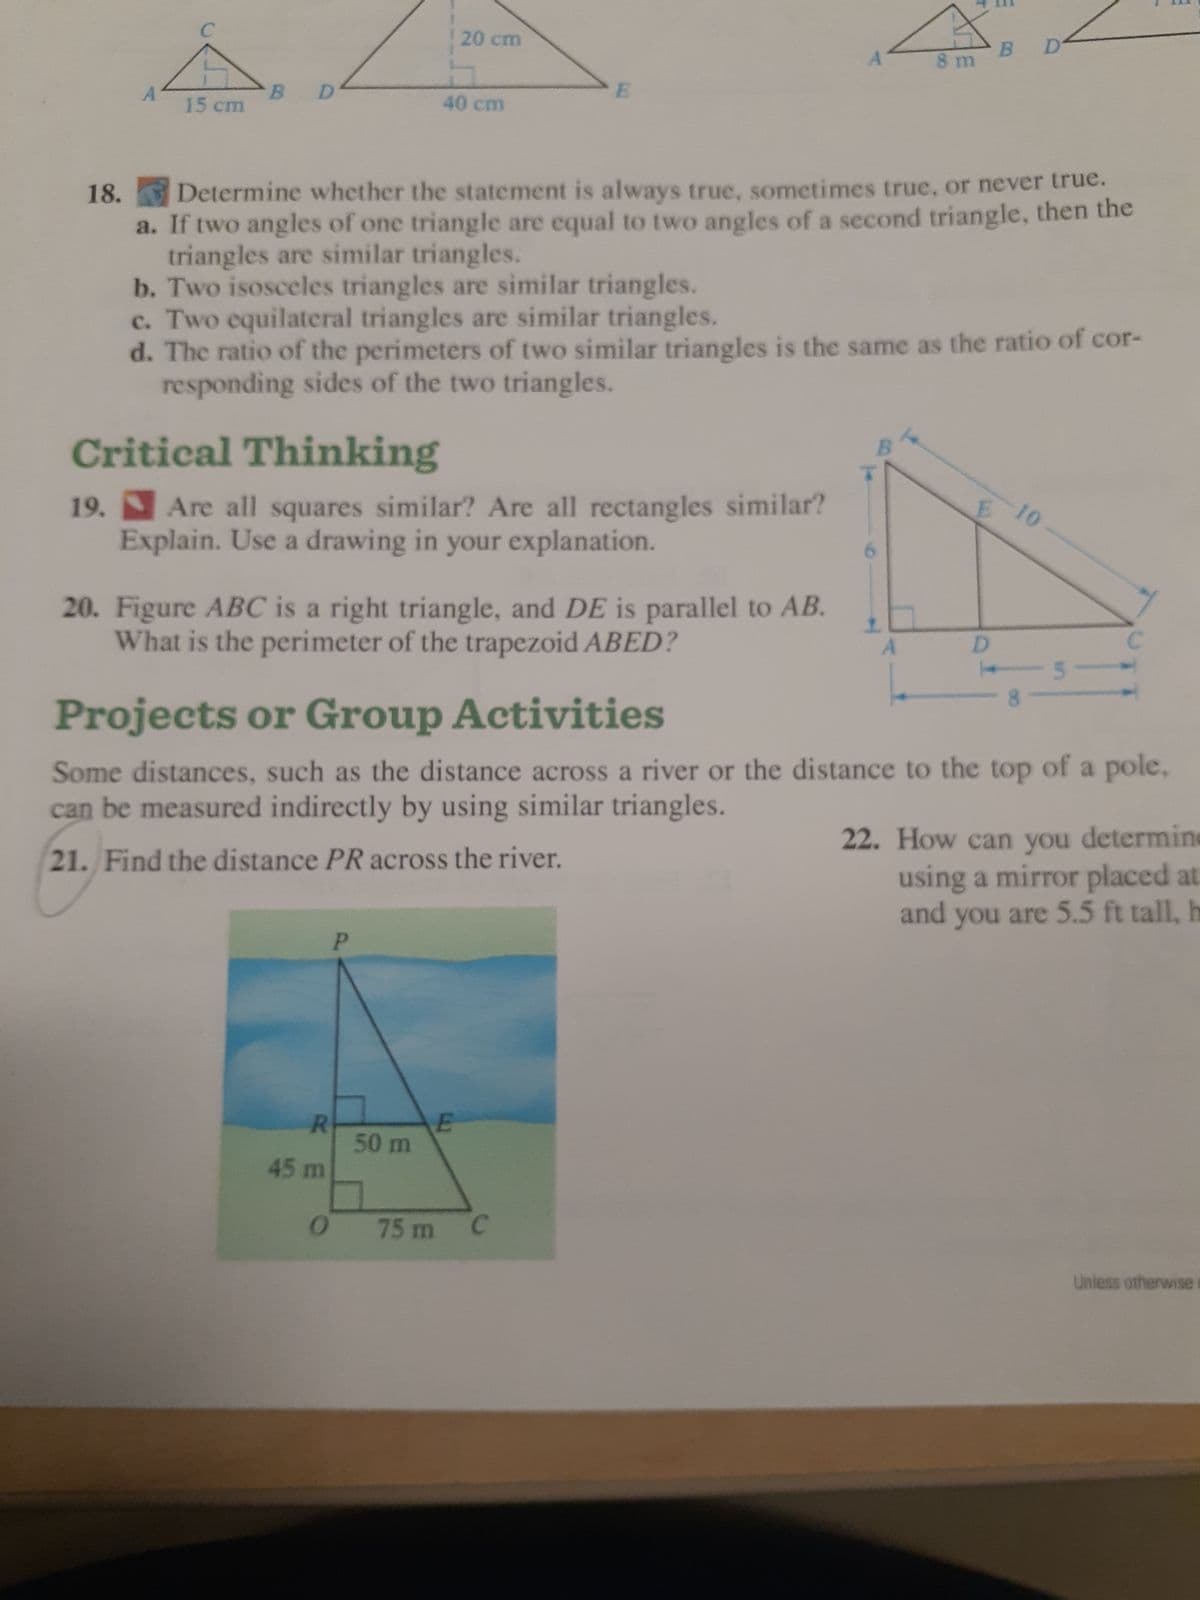 A
C
15 cm
B
D
Critical Thinking
19. Are all squares similar? Are all rectangles similar?
Explain. Use a drawing in your explanation.
R
45 m
20. Figure ABC is a right triangle, and DE is parallel to AB.
What is the perimeter of the trapezoid ABED?
0
20 cm
40 cm
P
50 m
18. Determine whether the statement is always true, sometimes true, or never true.
a. If two angles of one triangle are equal to two angles of a second triangle, then the
triangles are similar triangles.
b. Two isosceles triangles are similar triangles.
c. Two equilateral triangles are similar triangles.
d. The ratio of the perimeters of two similar triangles is the same as the ratio of cor-
responding sides of the two triangles.
E
E
75 m
A
C
8 m
+
Projects or Group Activities
Some distances, such as the distance across a river or the distance to the top of a pole,
can be measured indirectly by using similar triangles.
21. Find the distance PR across the river.
E
B
D
D
-10
22. How can you determine
using a mirror placed at
and you are 5.5 ft tall, h
Unless otherwise